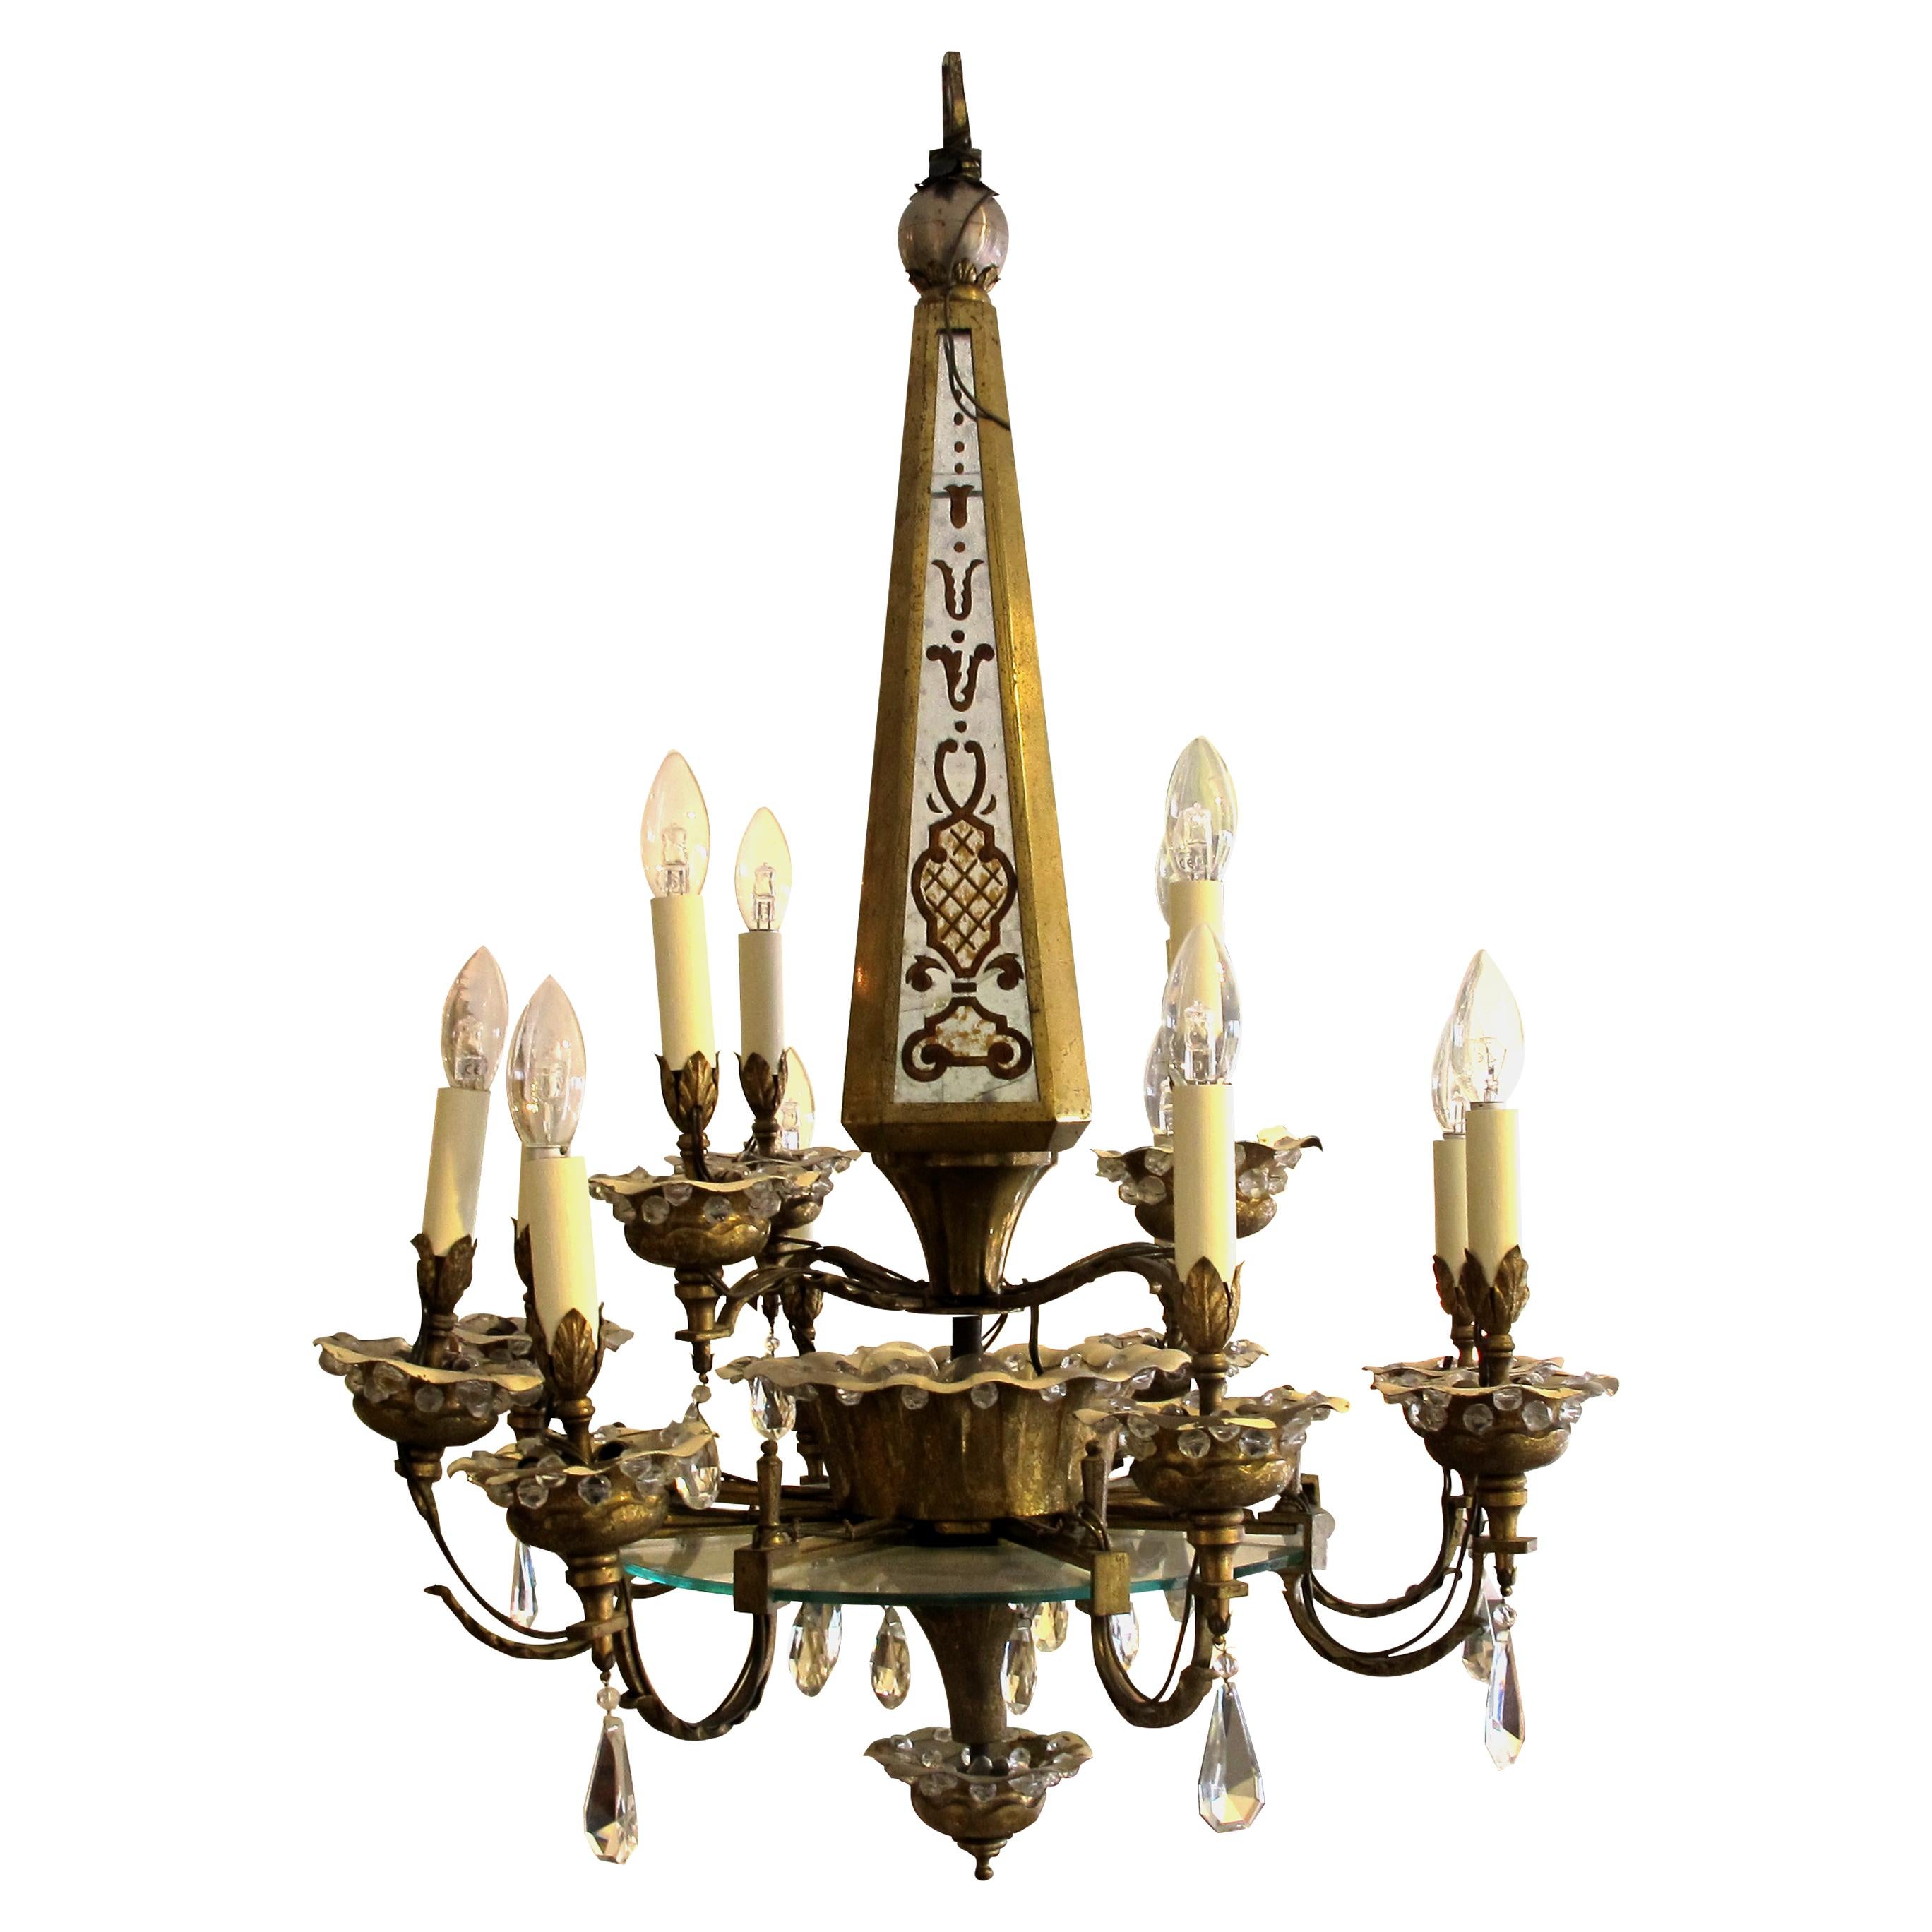 An elegant French Belle Époque twelve-arm Obelisk chandelier by Maison Baguès. This is a Classic gilt metal chandelier from the early 20th century from Maison Baguès with cut glass crystals and églomisé mirrors on the obelisk stem. The twelve arms